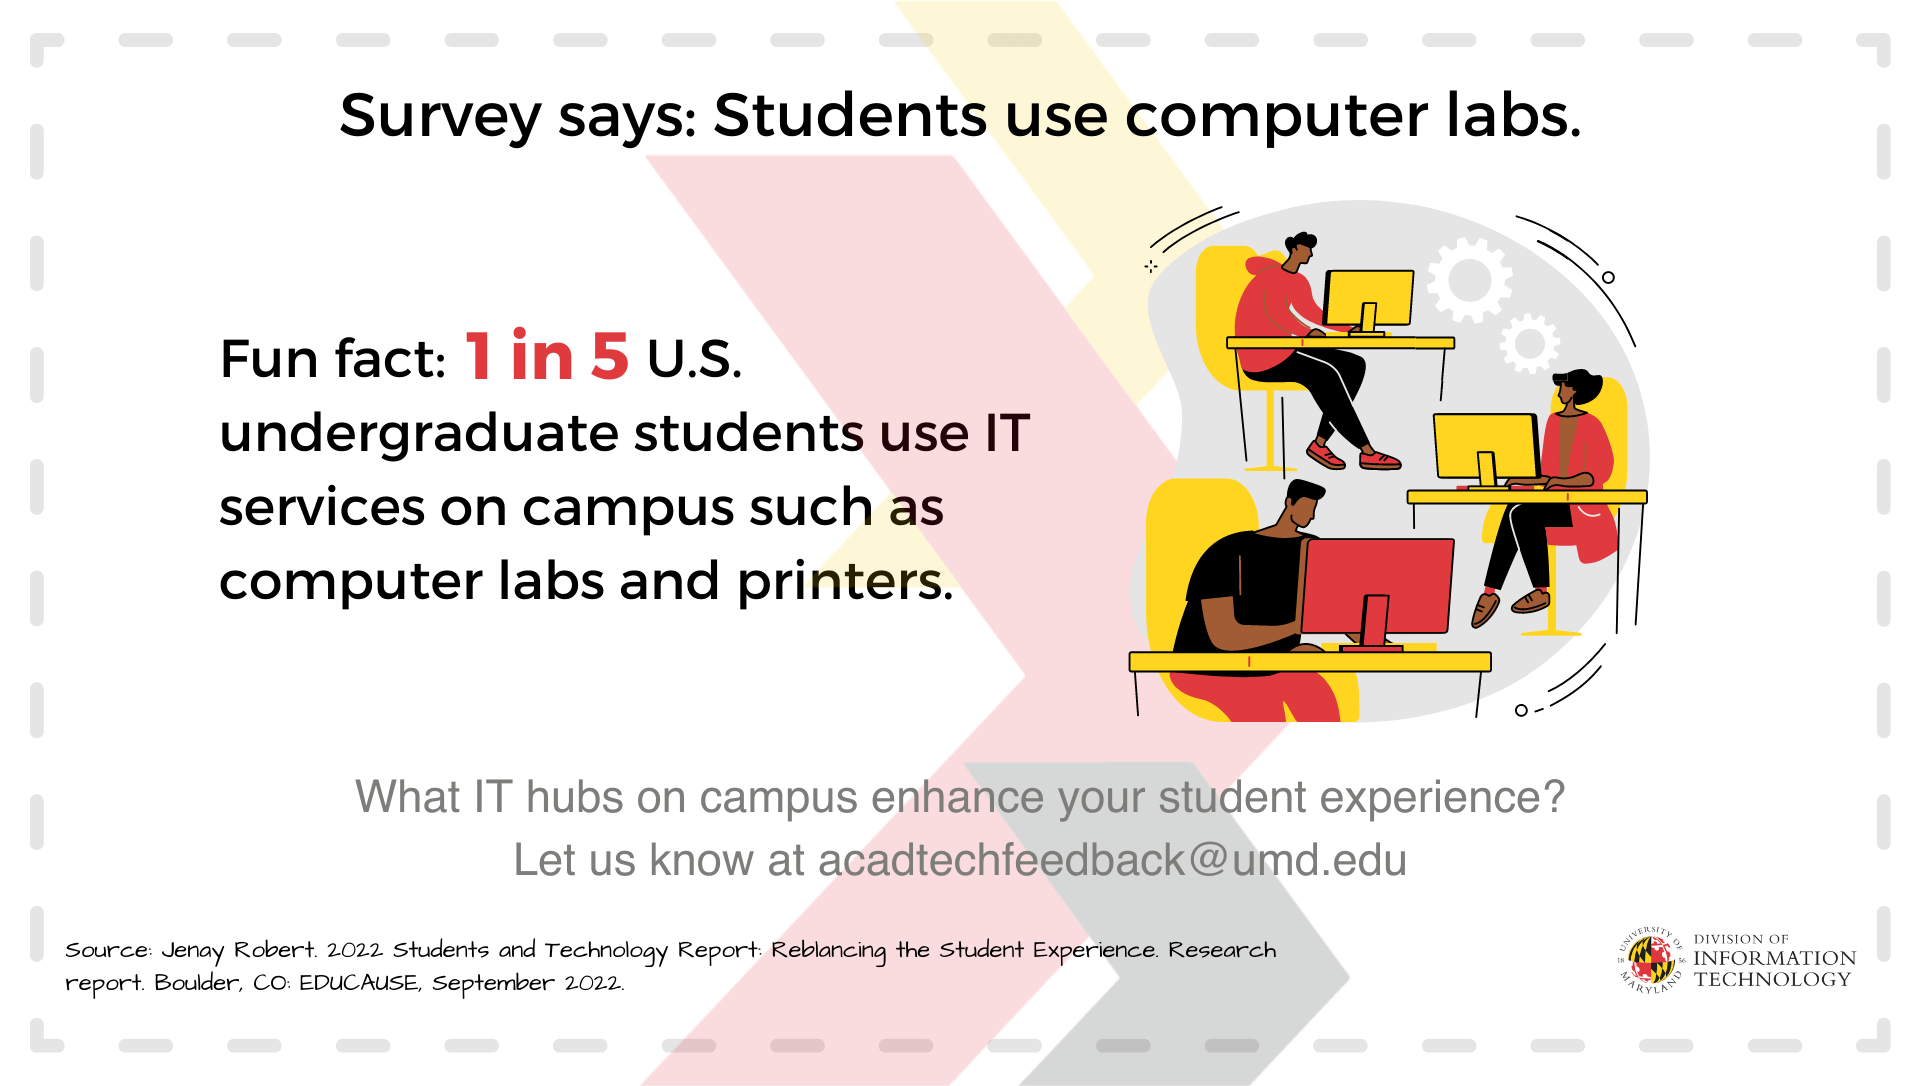 Survey says: Students use computer labs. Fun fact: 1 in 5 U.S. undergraduate students use IT services on campus such as computer labs and printers. What IT hubs on campus enhance your student experience? Let us know at acadtechfeedback@umd.edu